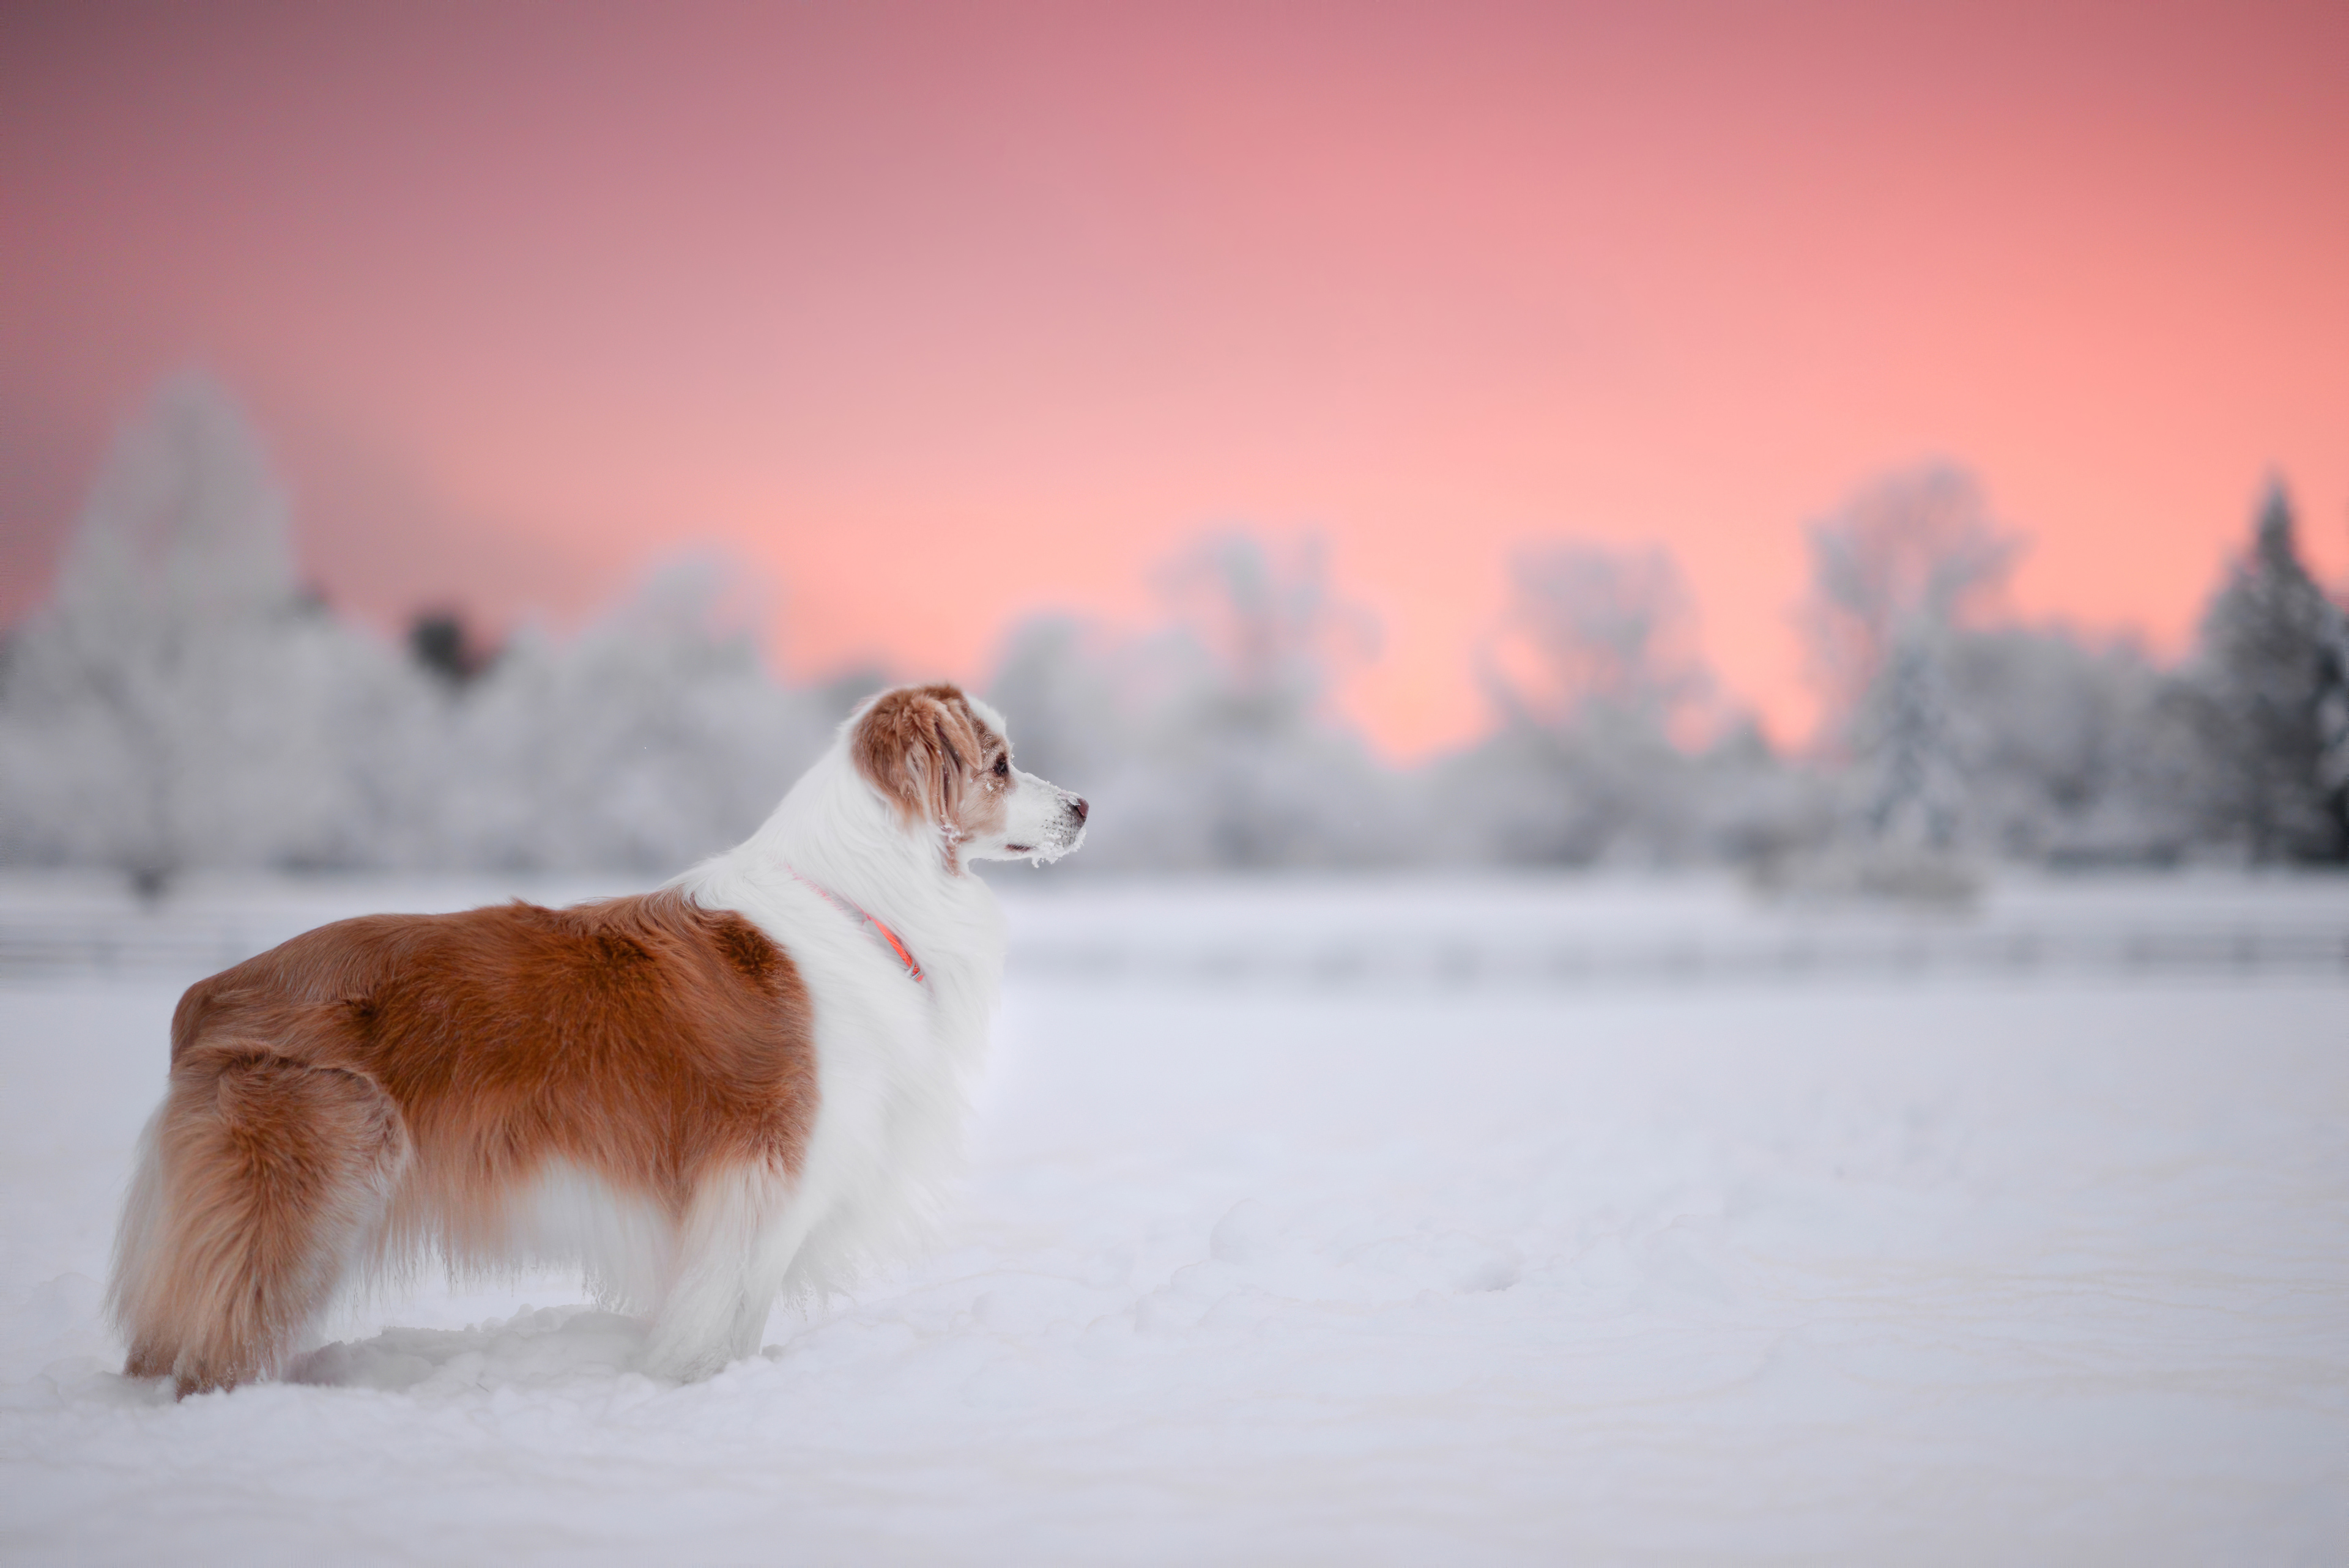 A long-shanked dog in winter at sunset